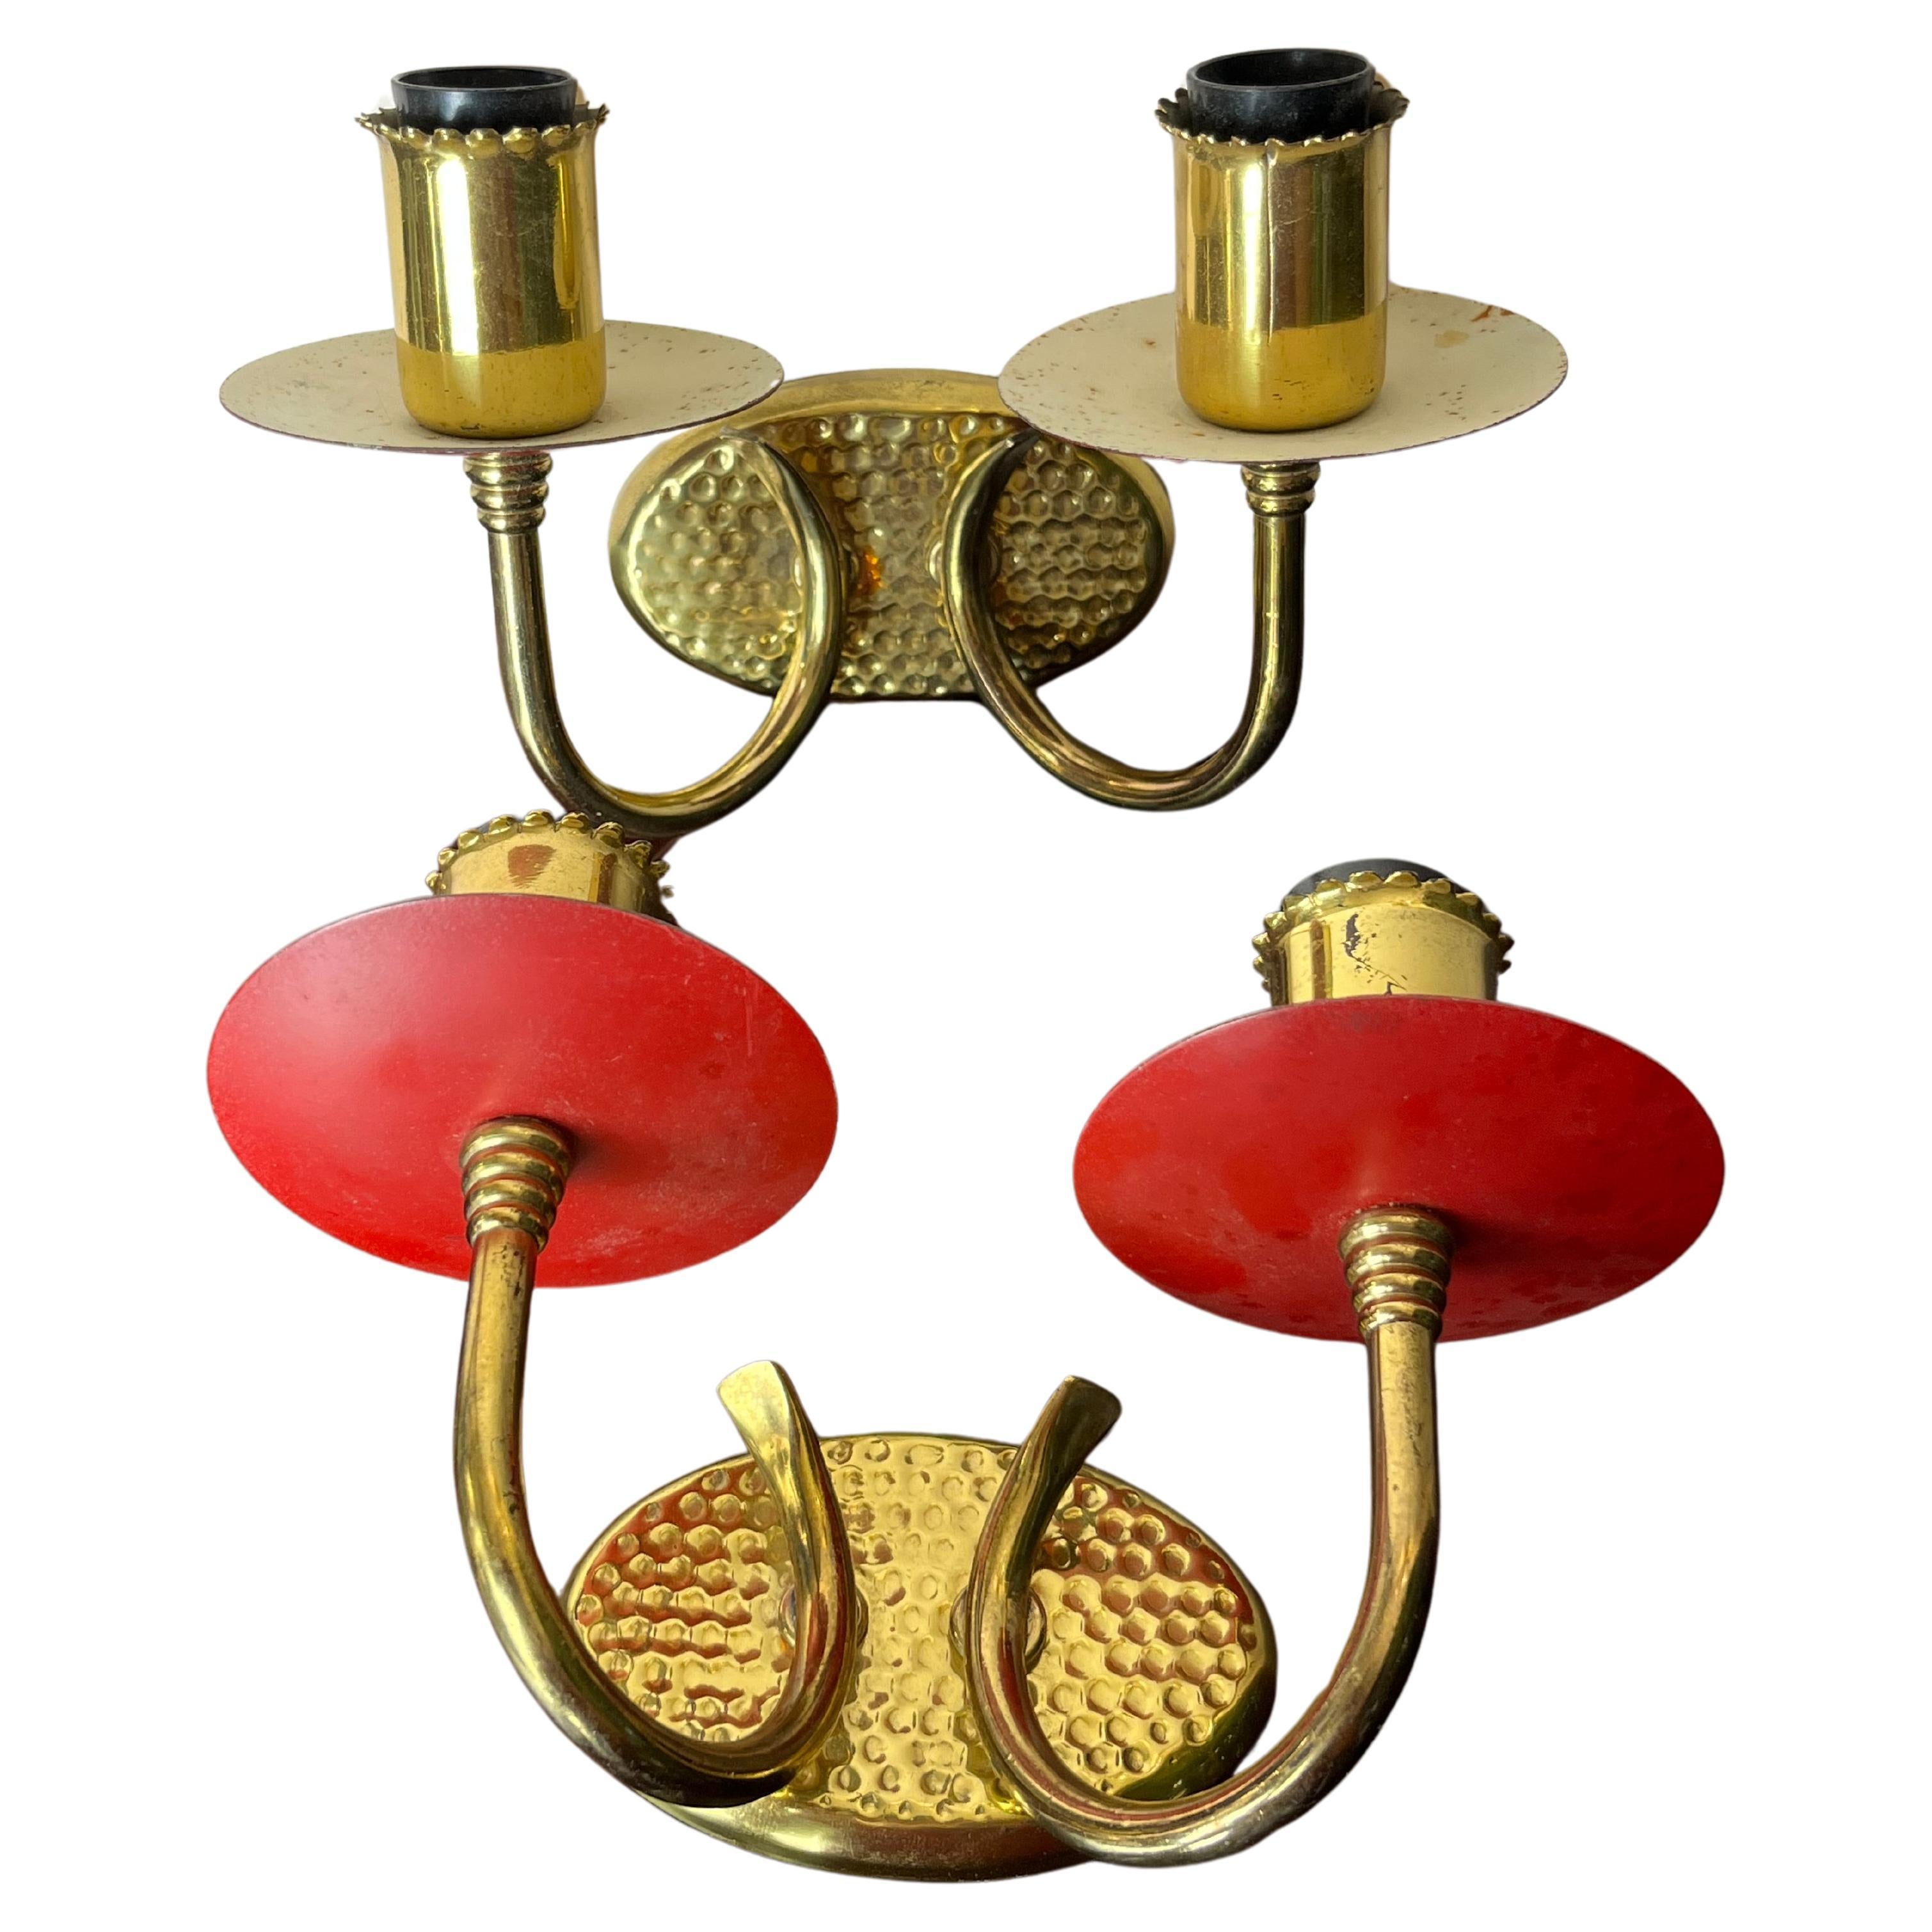 Set of 2 Wall Lamps in Brass and Colored Aluminium, Made in Italy, 1950s For Sale